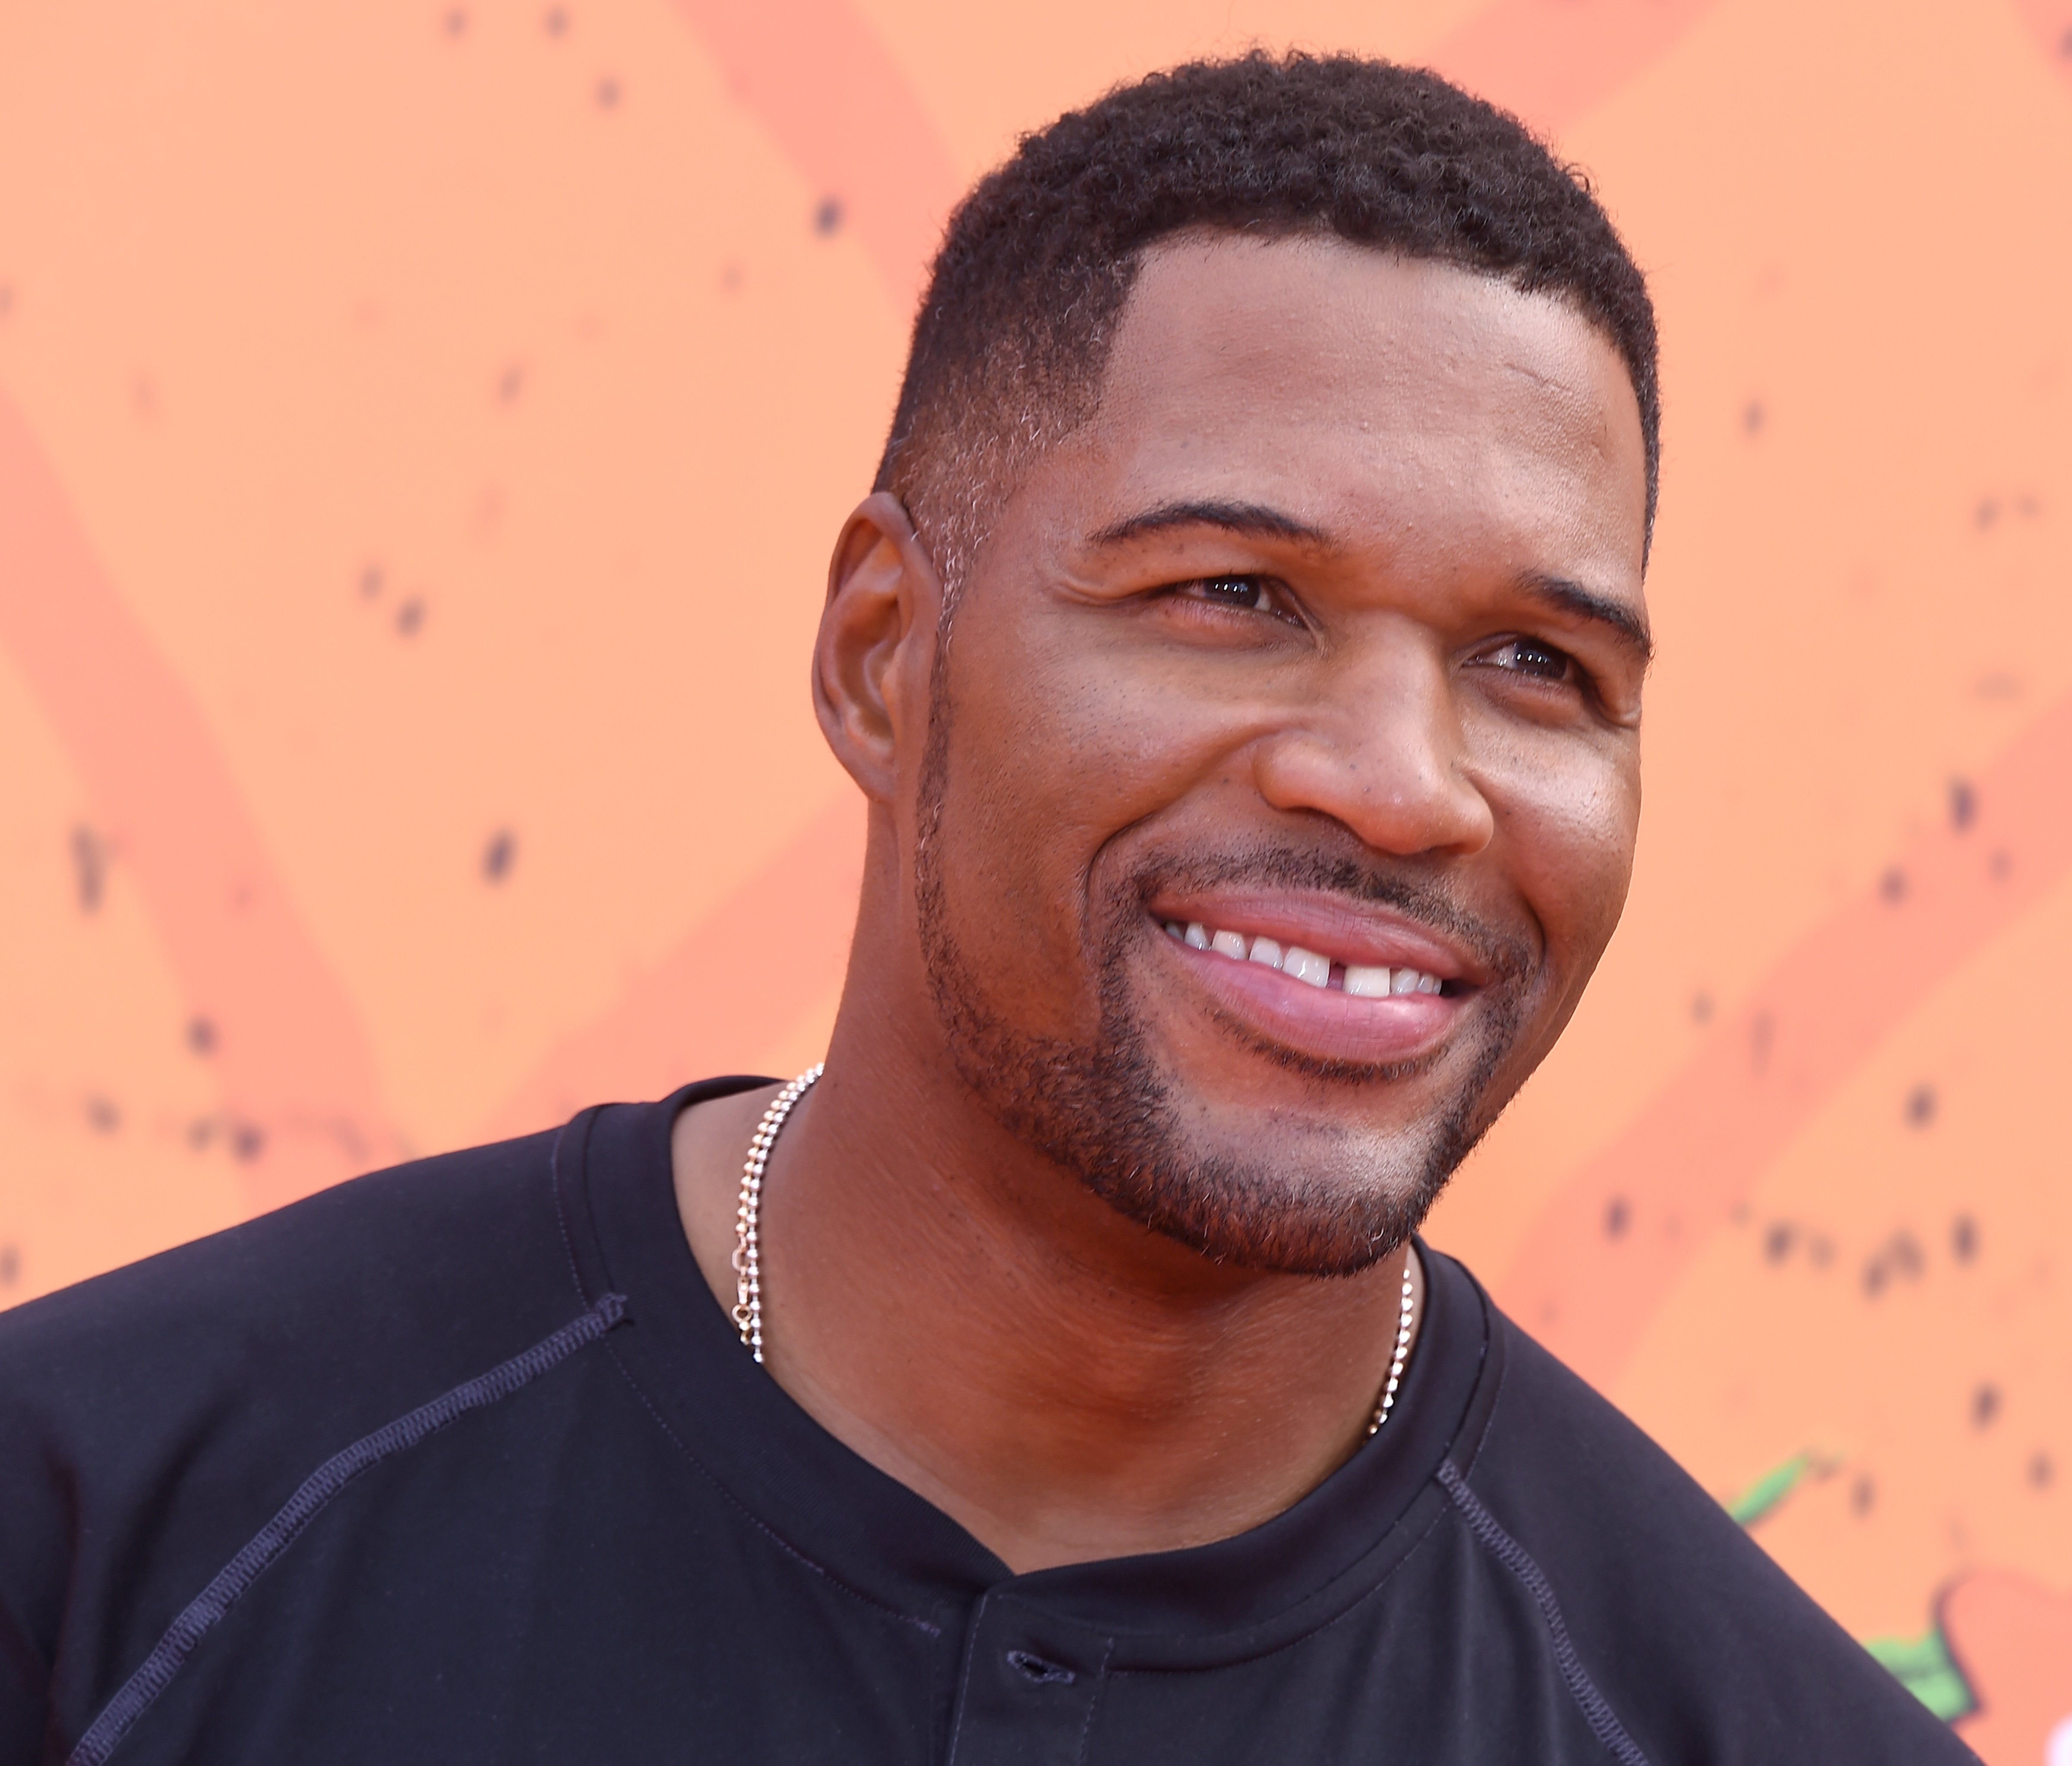 Michael Strahan arrives at Nickelodeon Kids' Choice Sports Awards 2016 at UCLA's Pauley Pavilion on July 14, 2016 in Westwood, California. (Gregg DeGuire—WireImage/Getty Images)